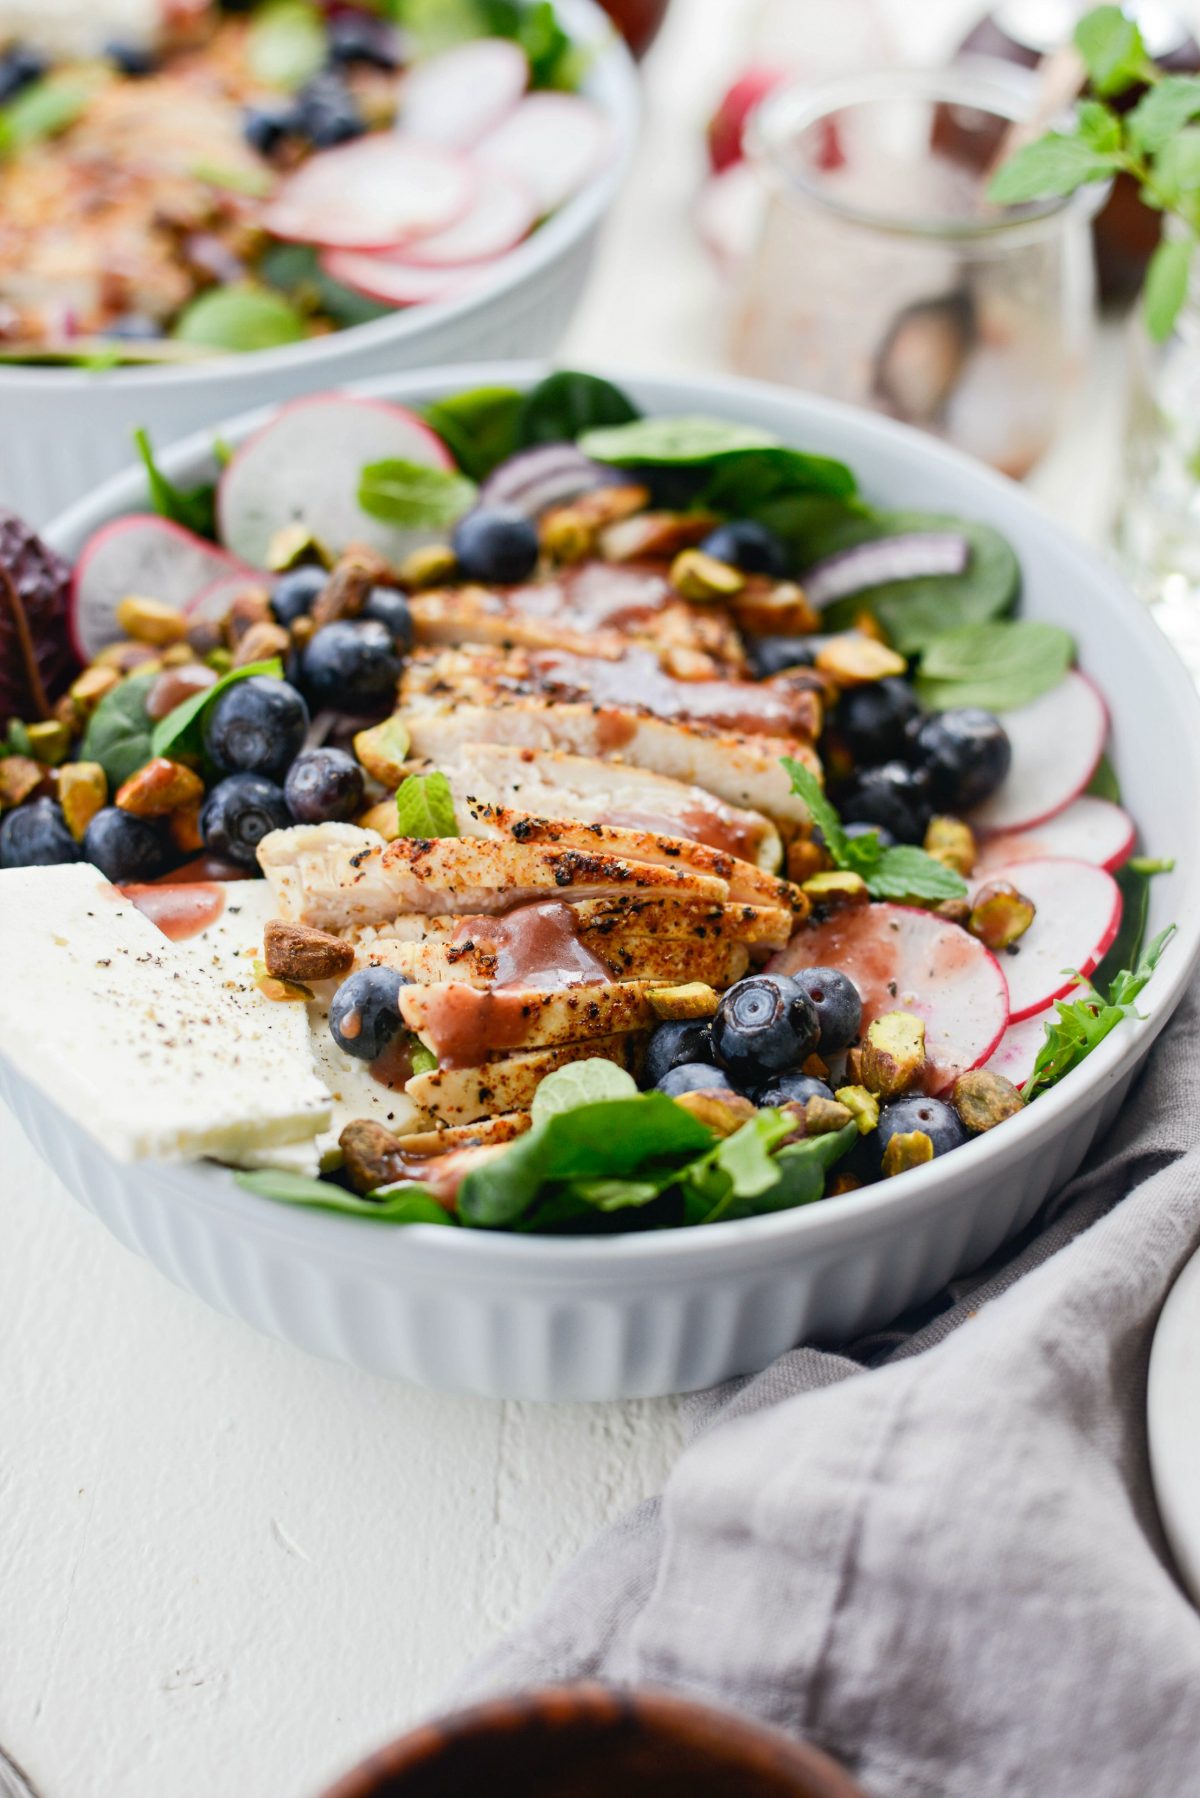 Chicken Blueberry Feta Salad with Pomegranate Jam Vinaigrette #chicken #blueberry #feta #salad #jamdressing